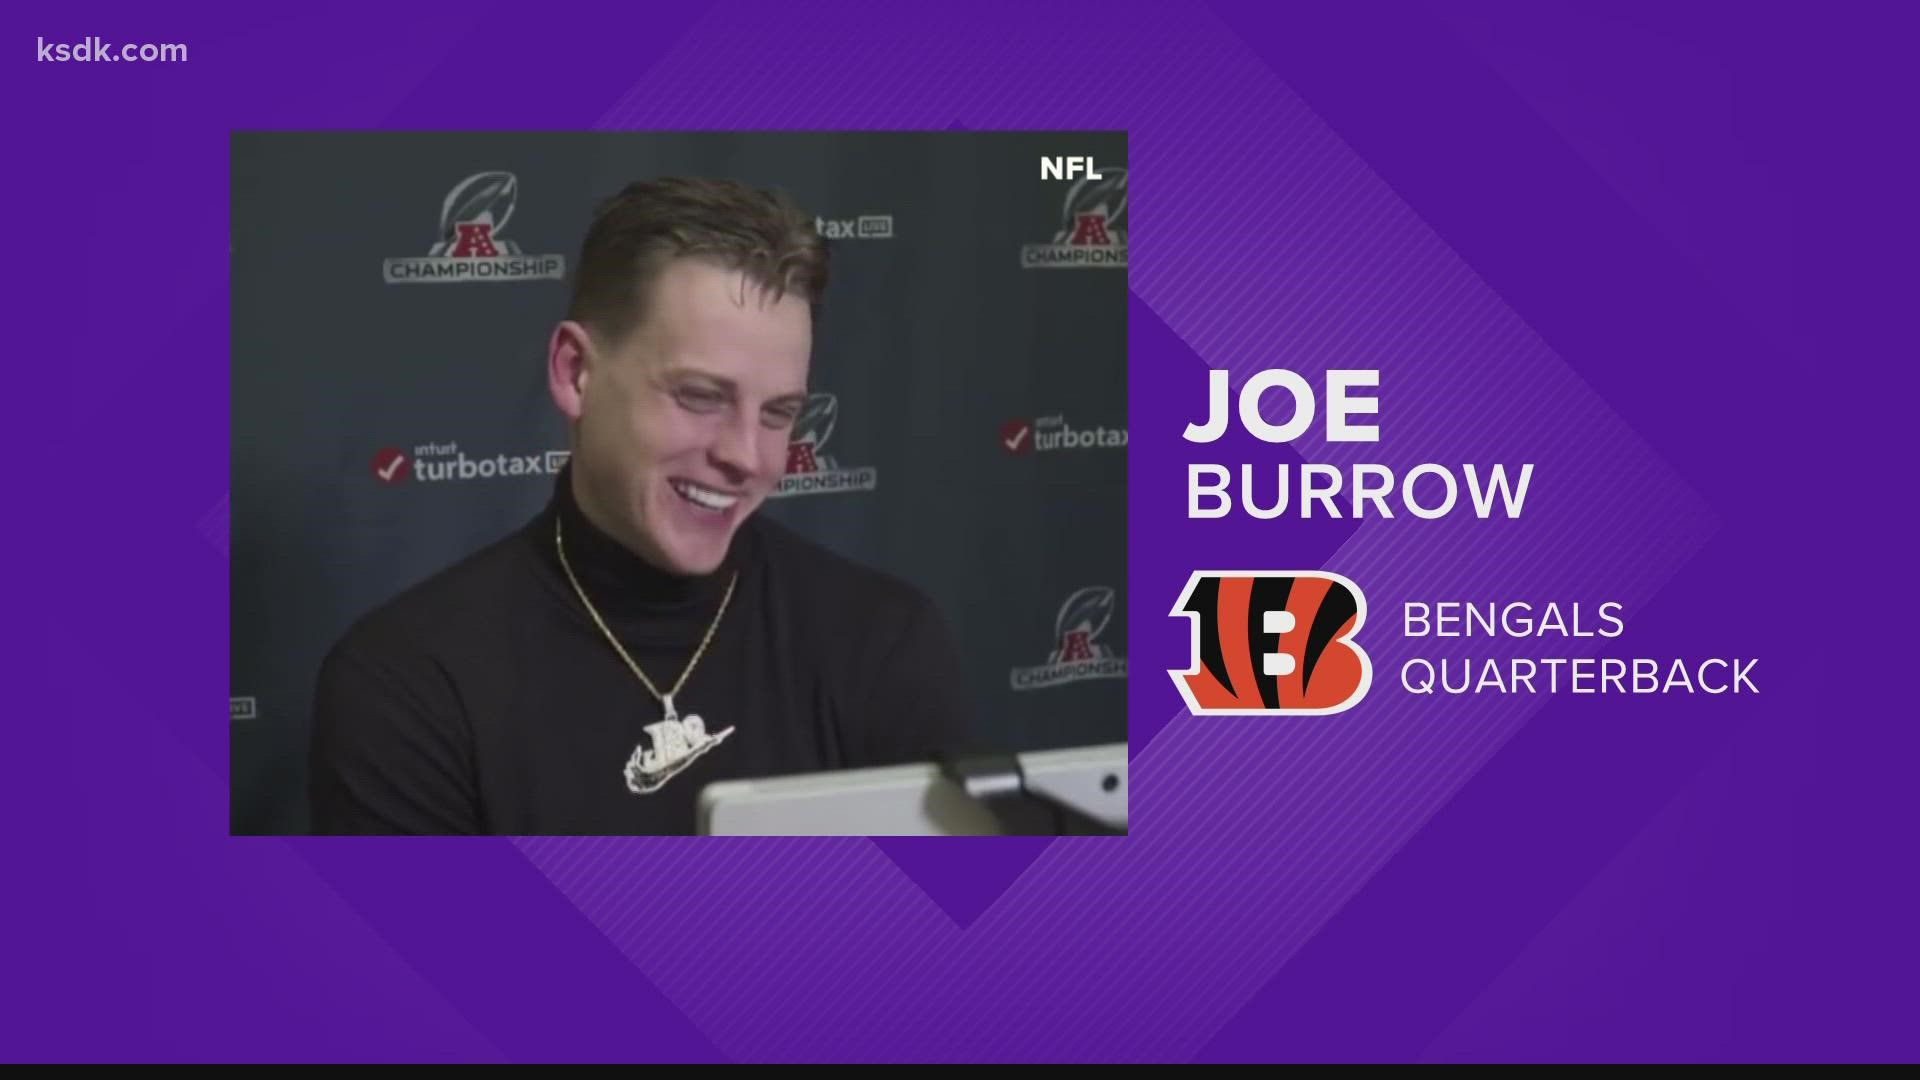 Burrow brought the swagger to the AFC Championship game against the Chiefs.